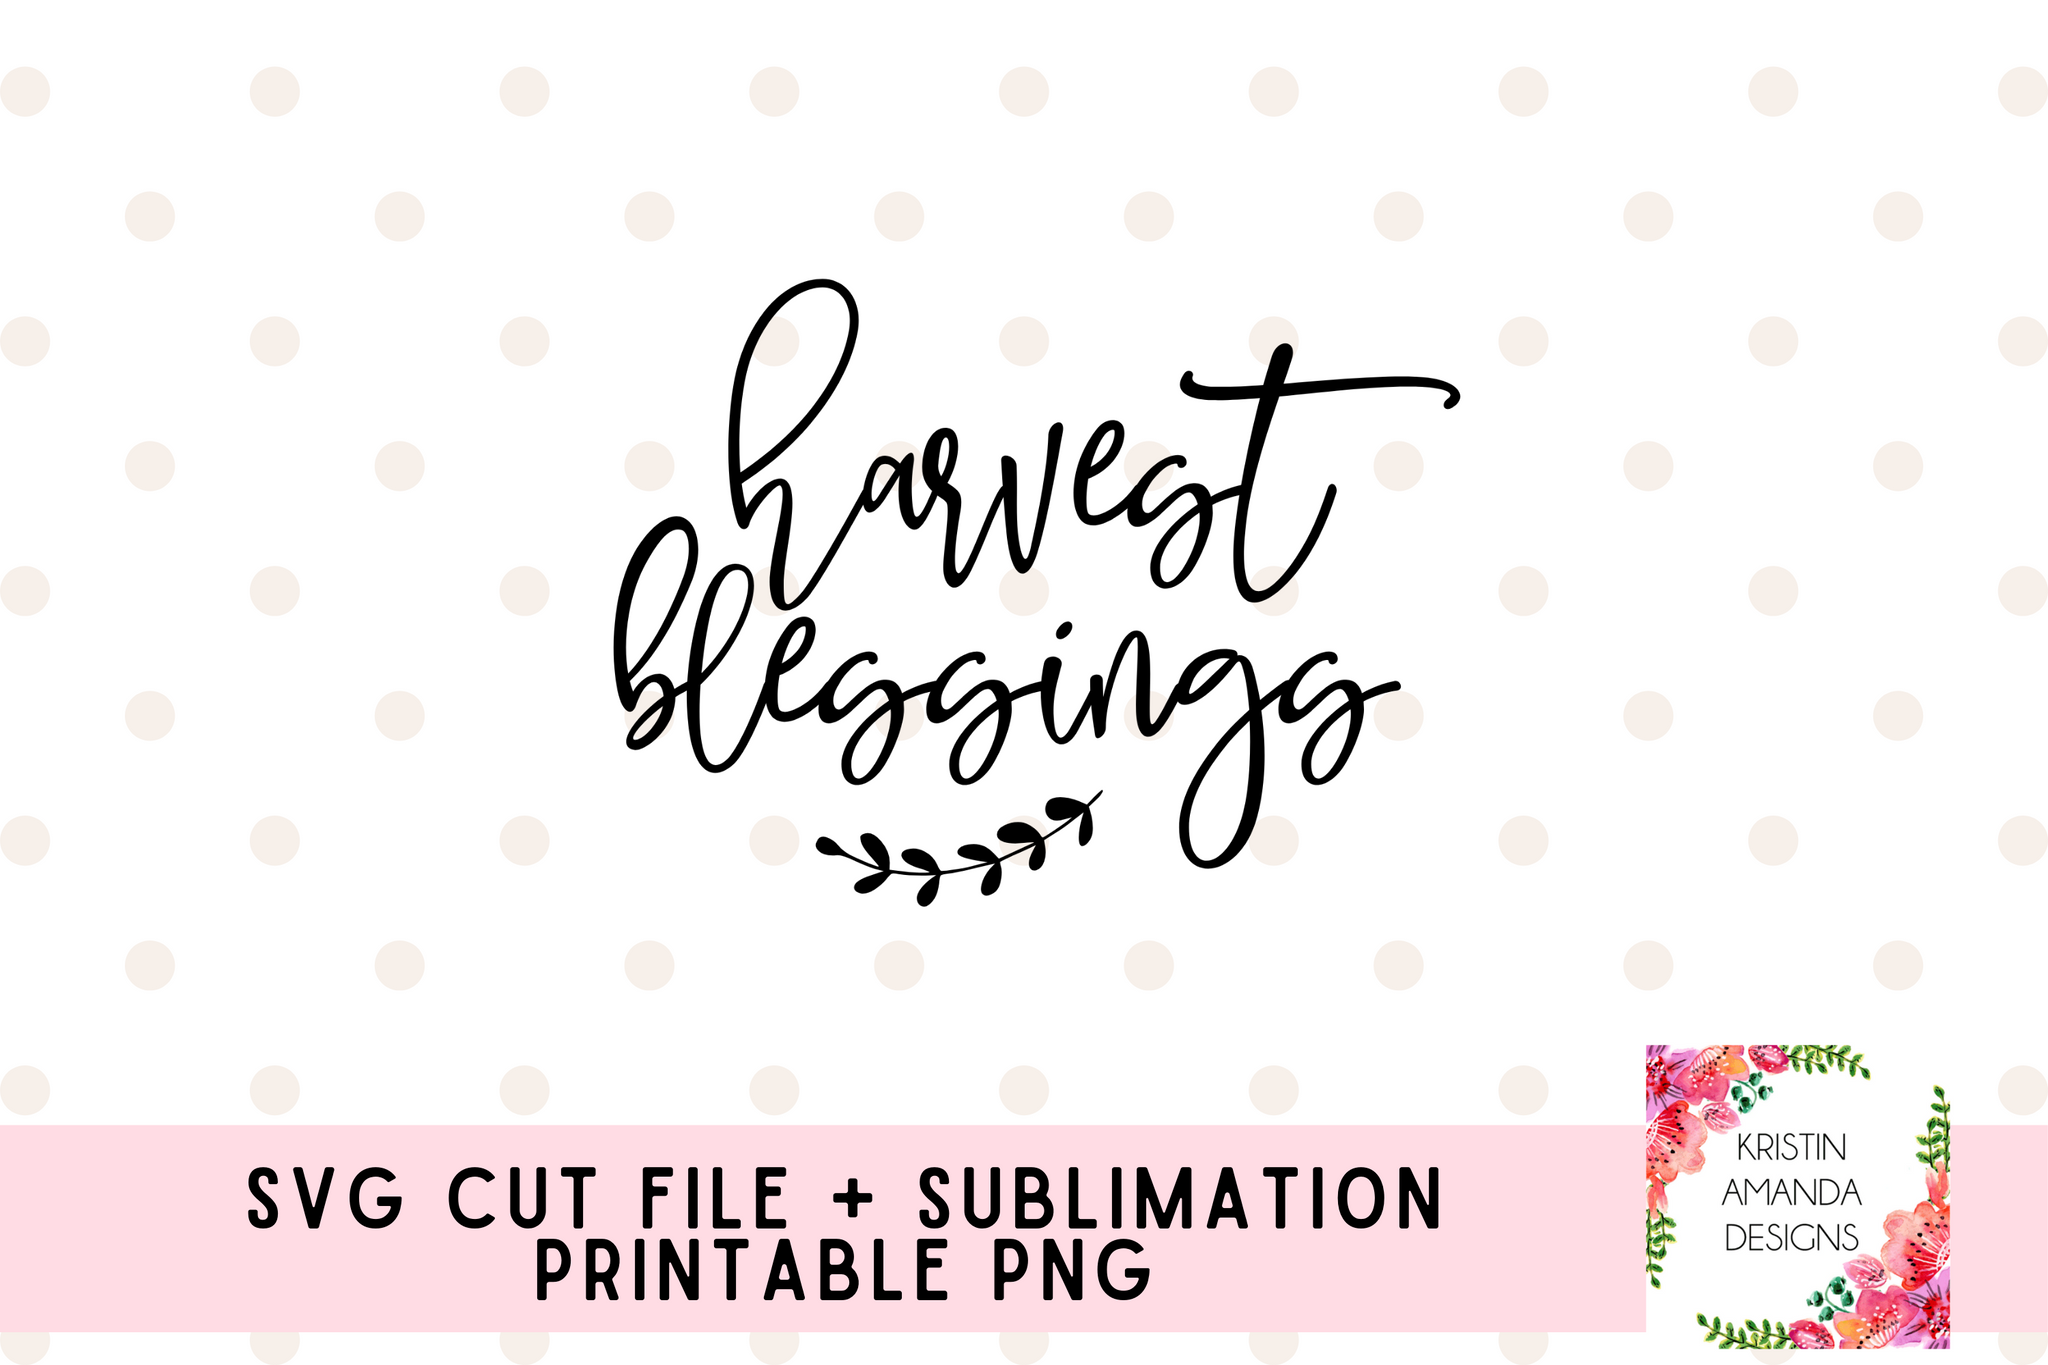 Harvest Blessings Fall SVG Cut File and PNG • Cricut • Silhouette